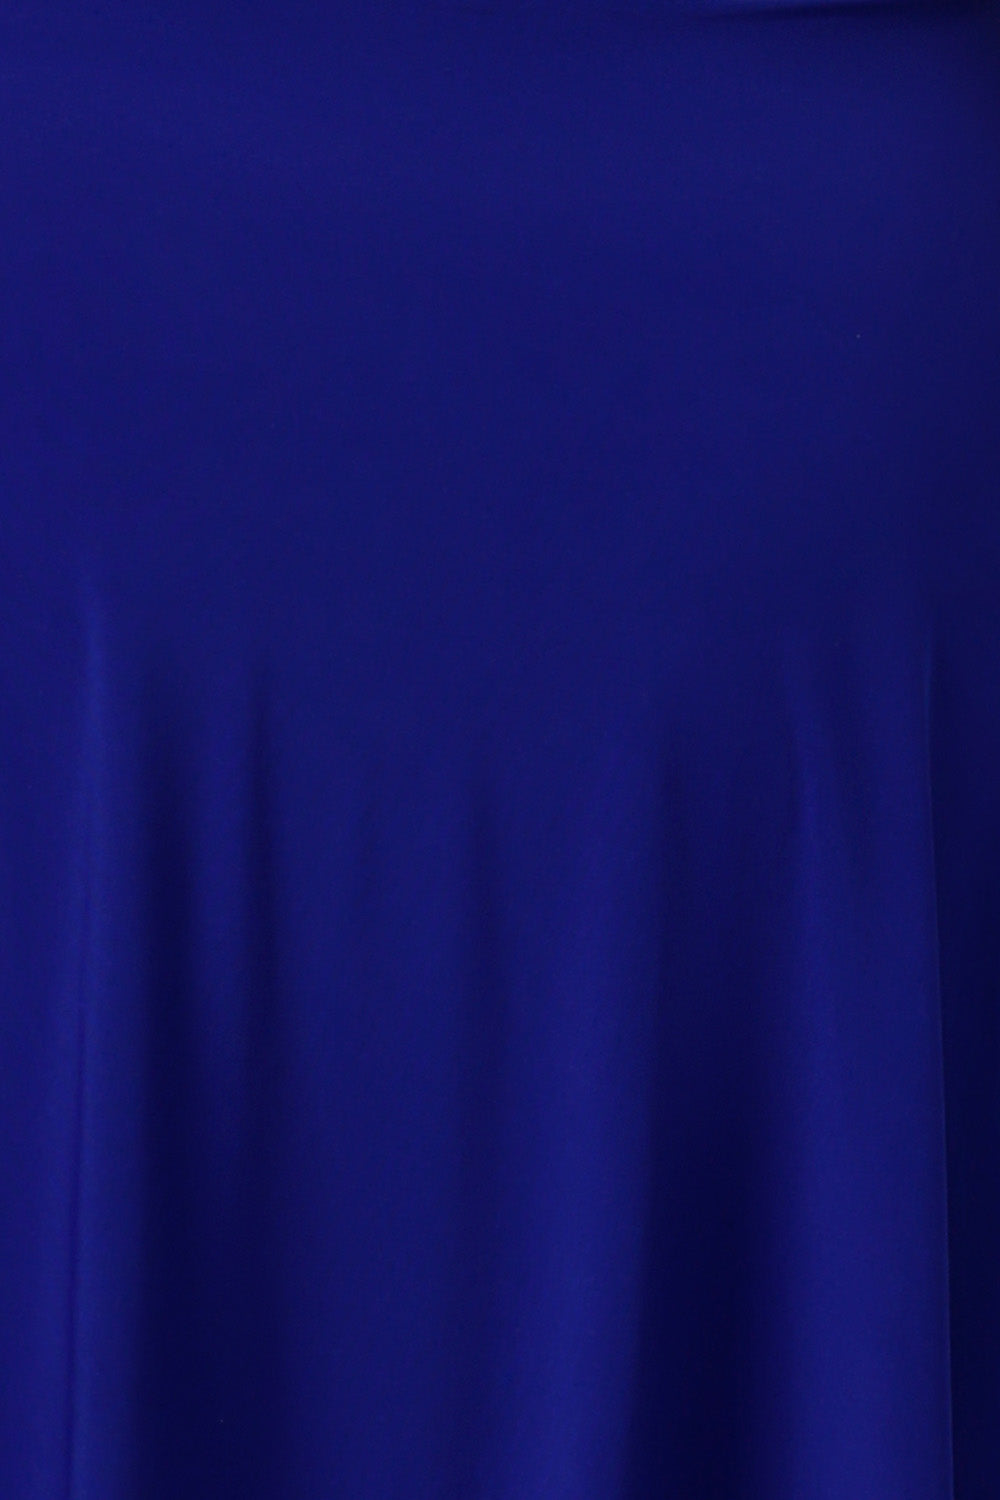 Swatch of an cobalt blue dry touch jersey fabric, used by Australian-made women's clothes brand, Leina & Fleur to make dresses, tops and skirts in sizes 8-24.